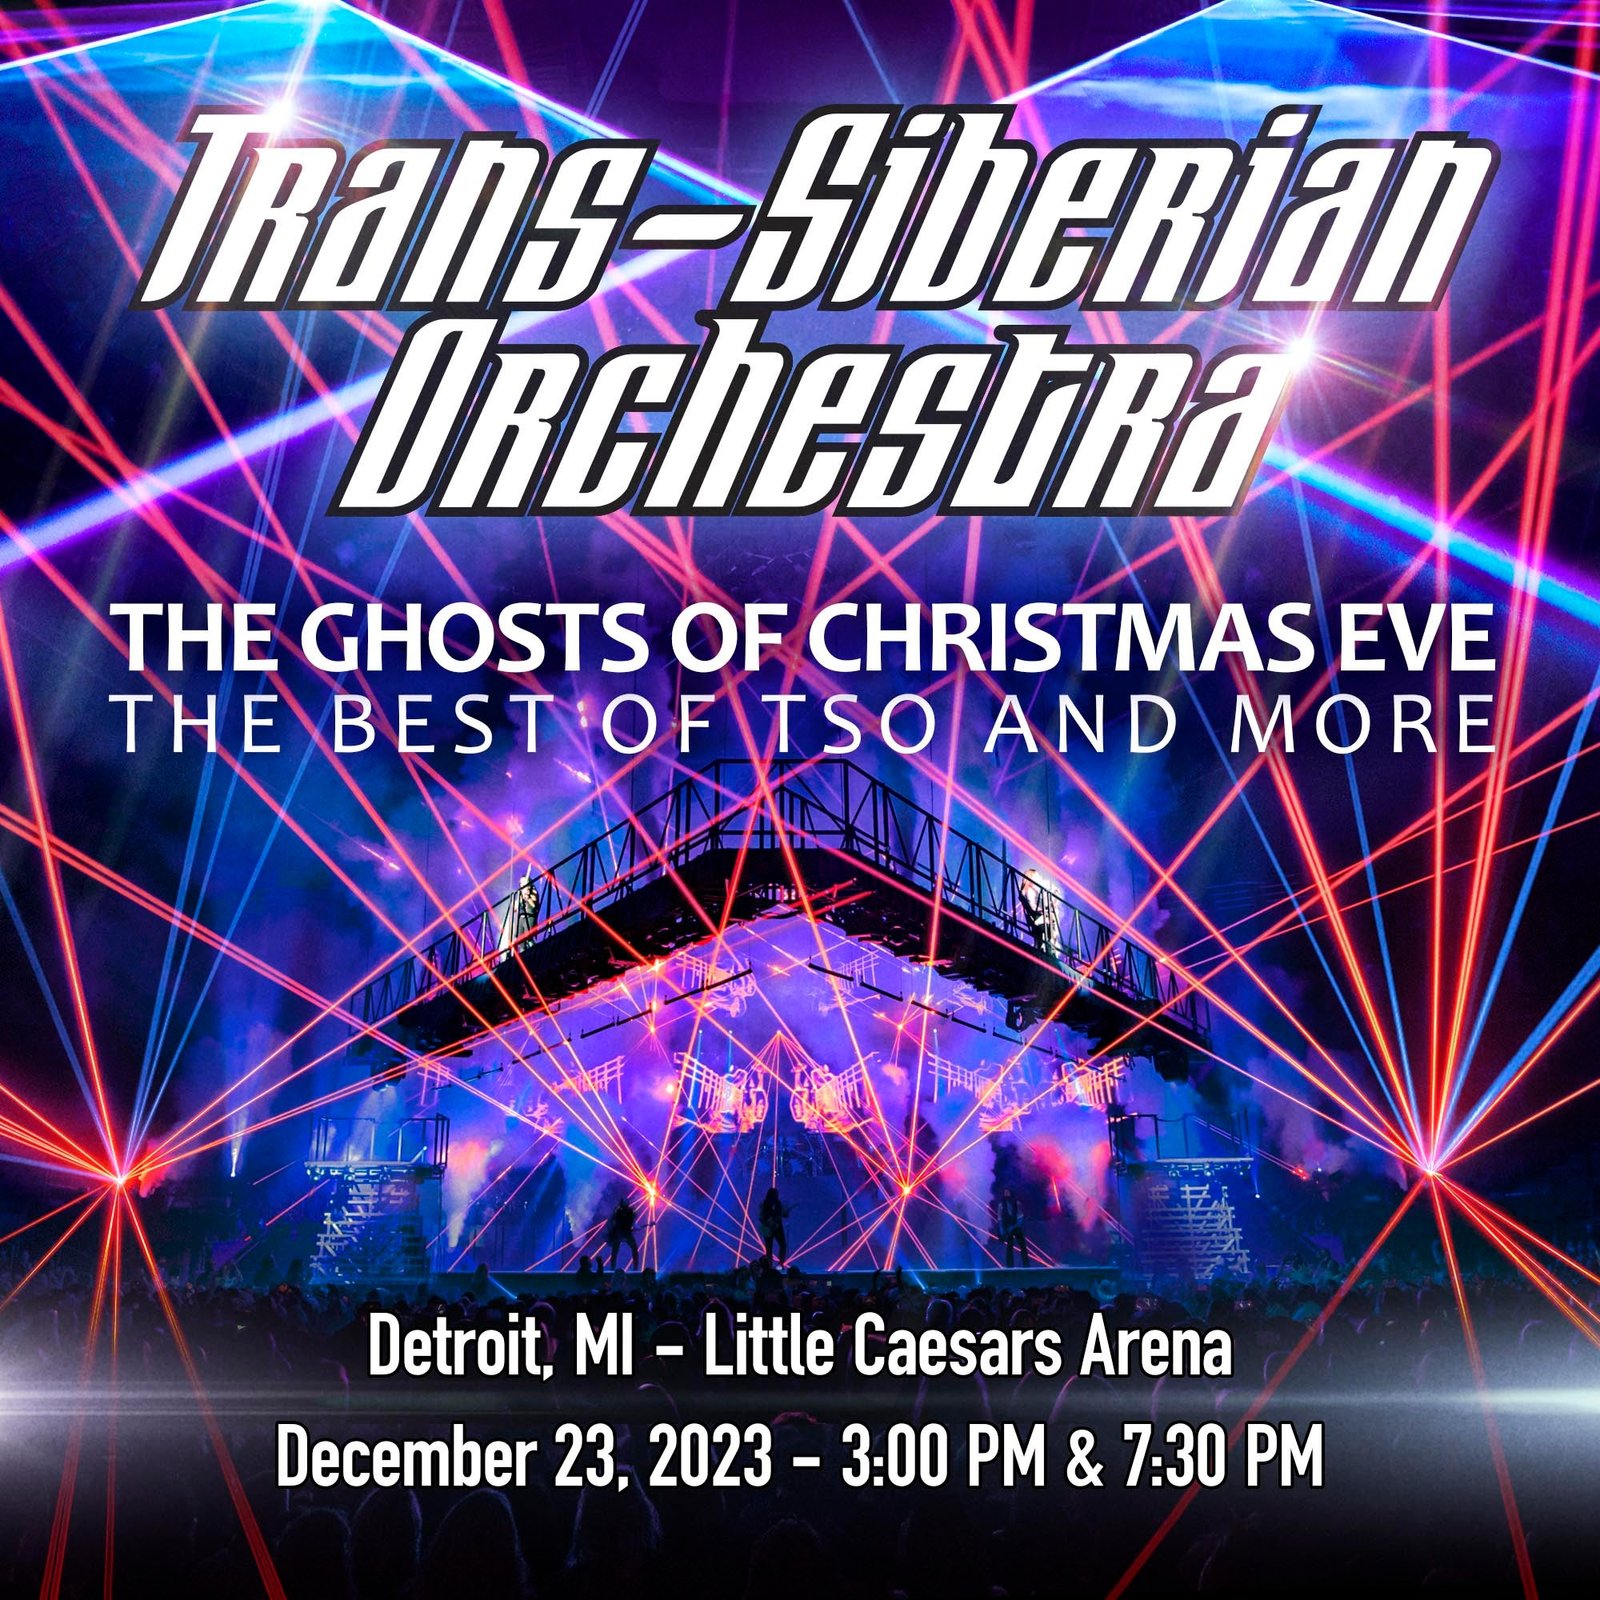 Trans Siberian Orchestra is religious